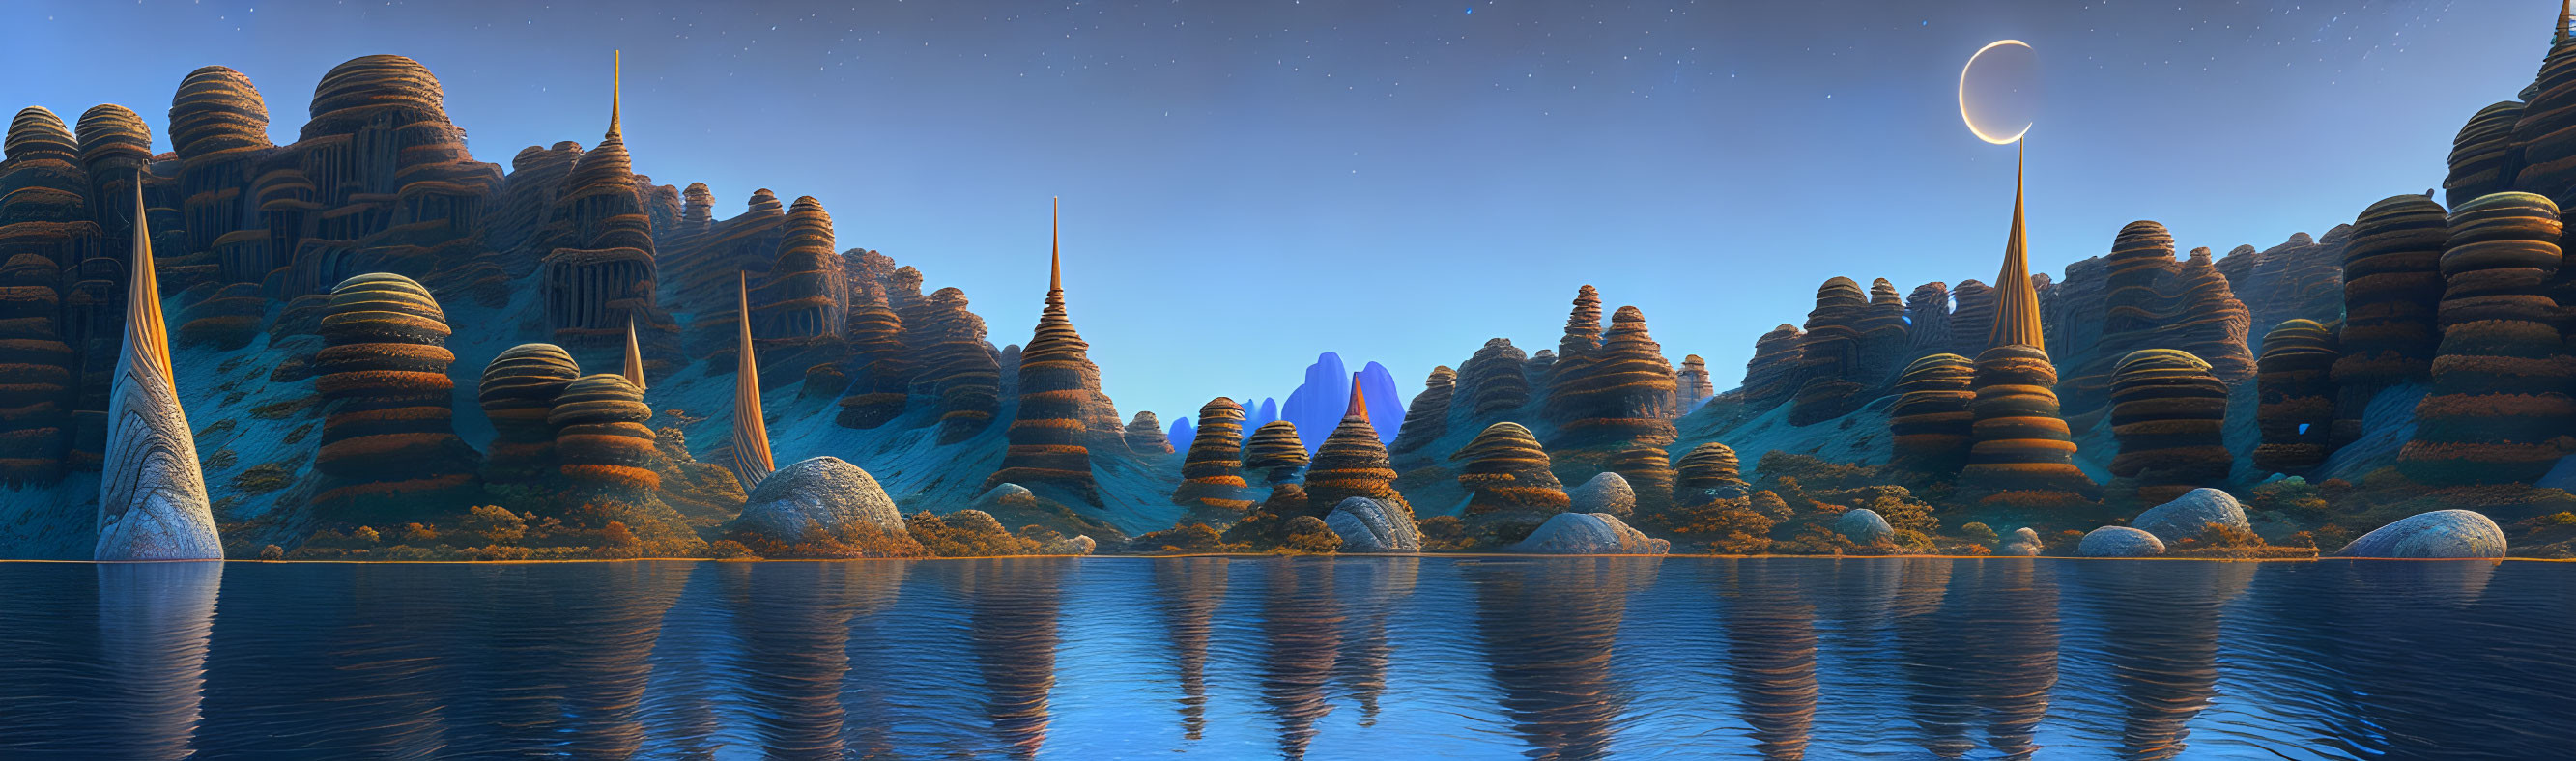 Alien landscape with layered rocks, reflective water, tall spires, crescent moon